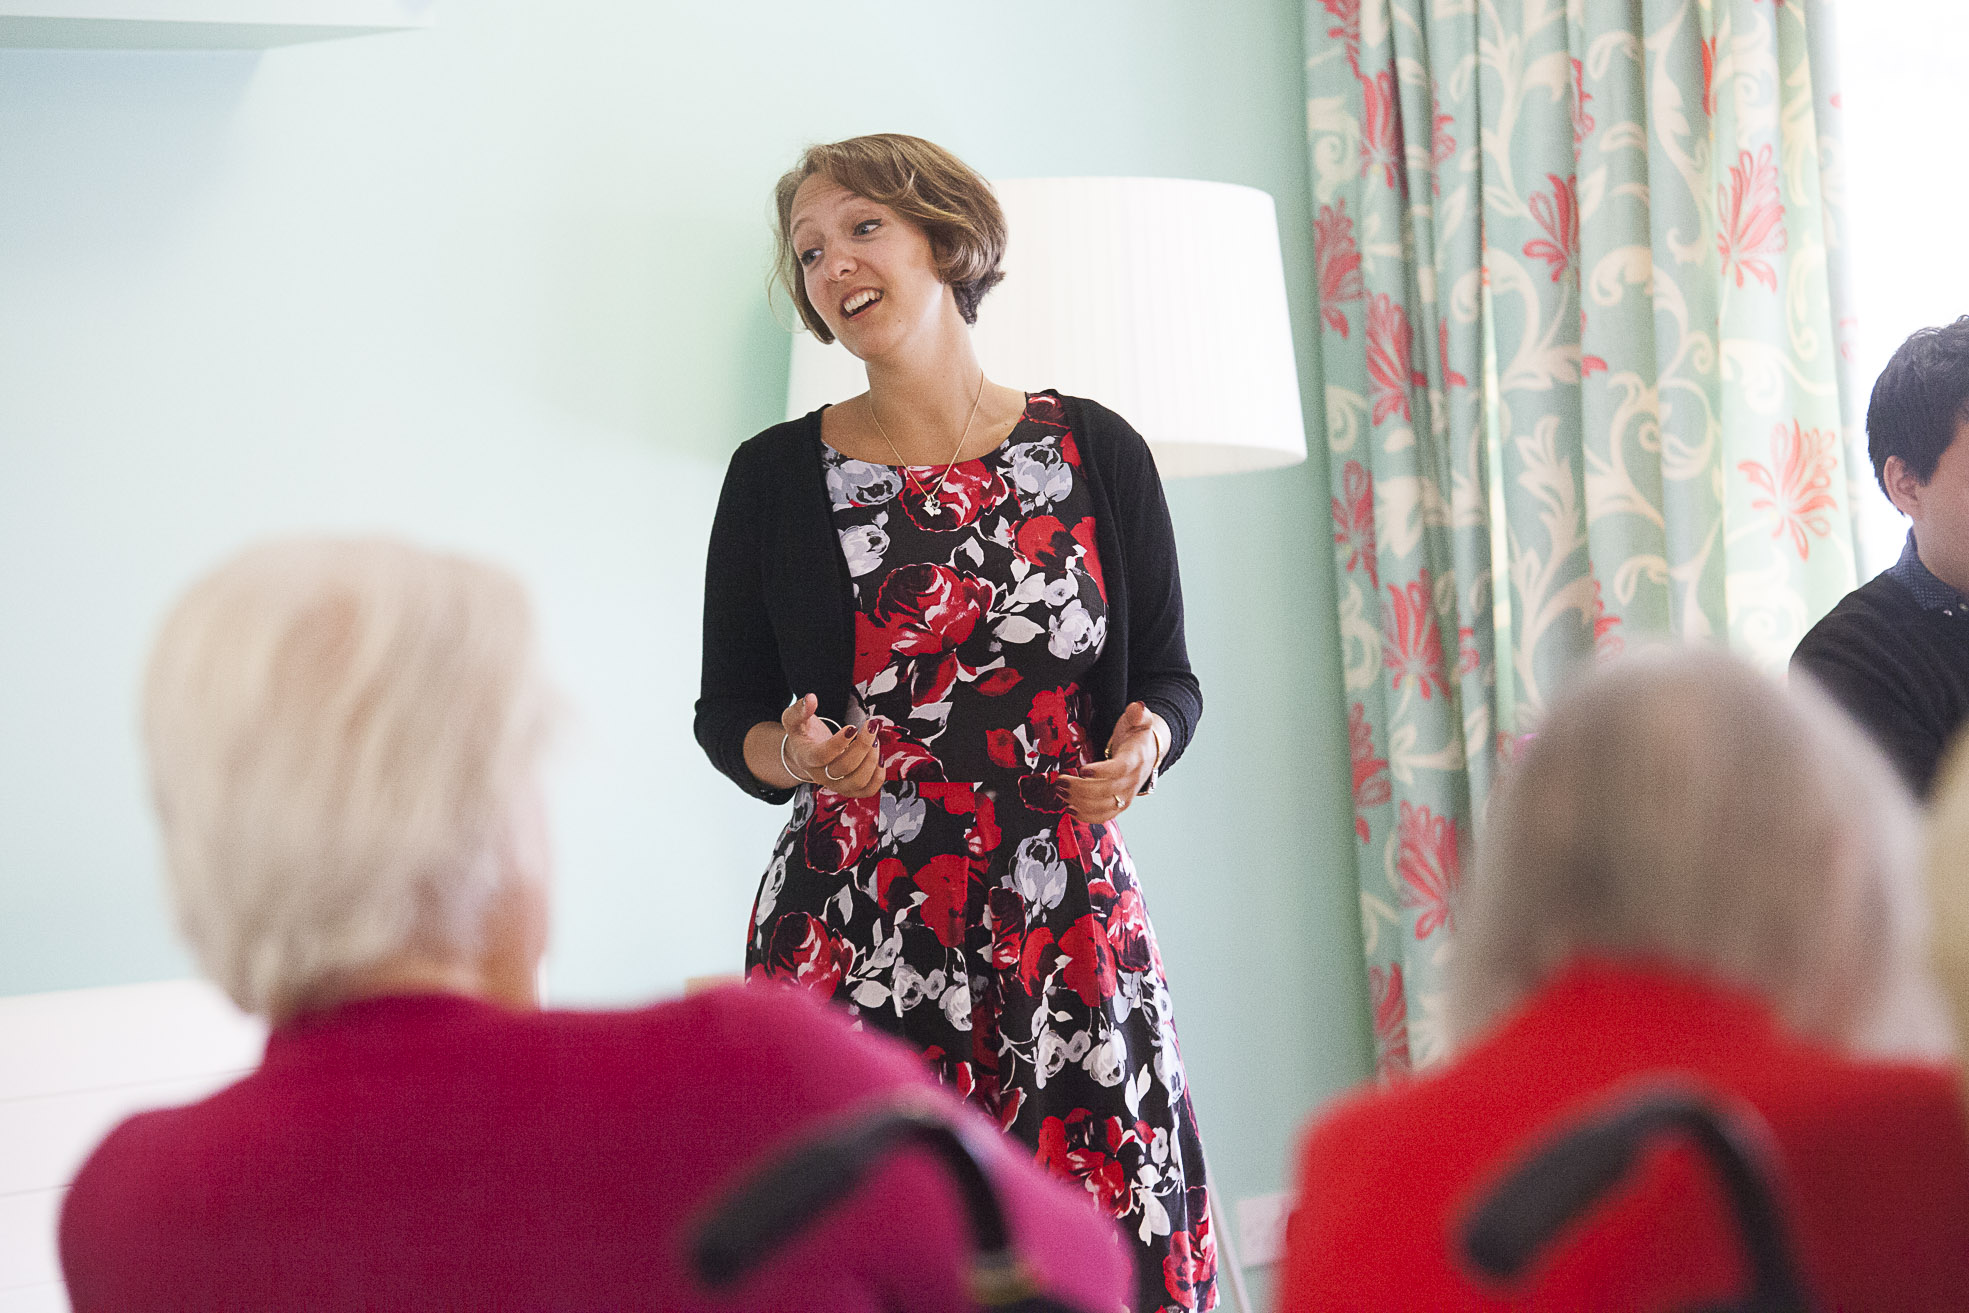 Musical treat for care home residents